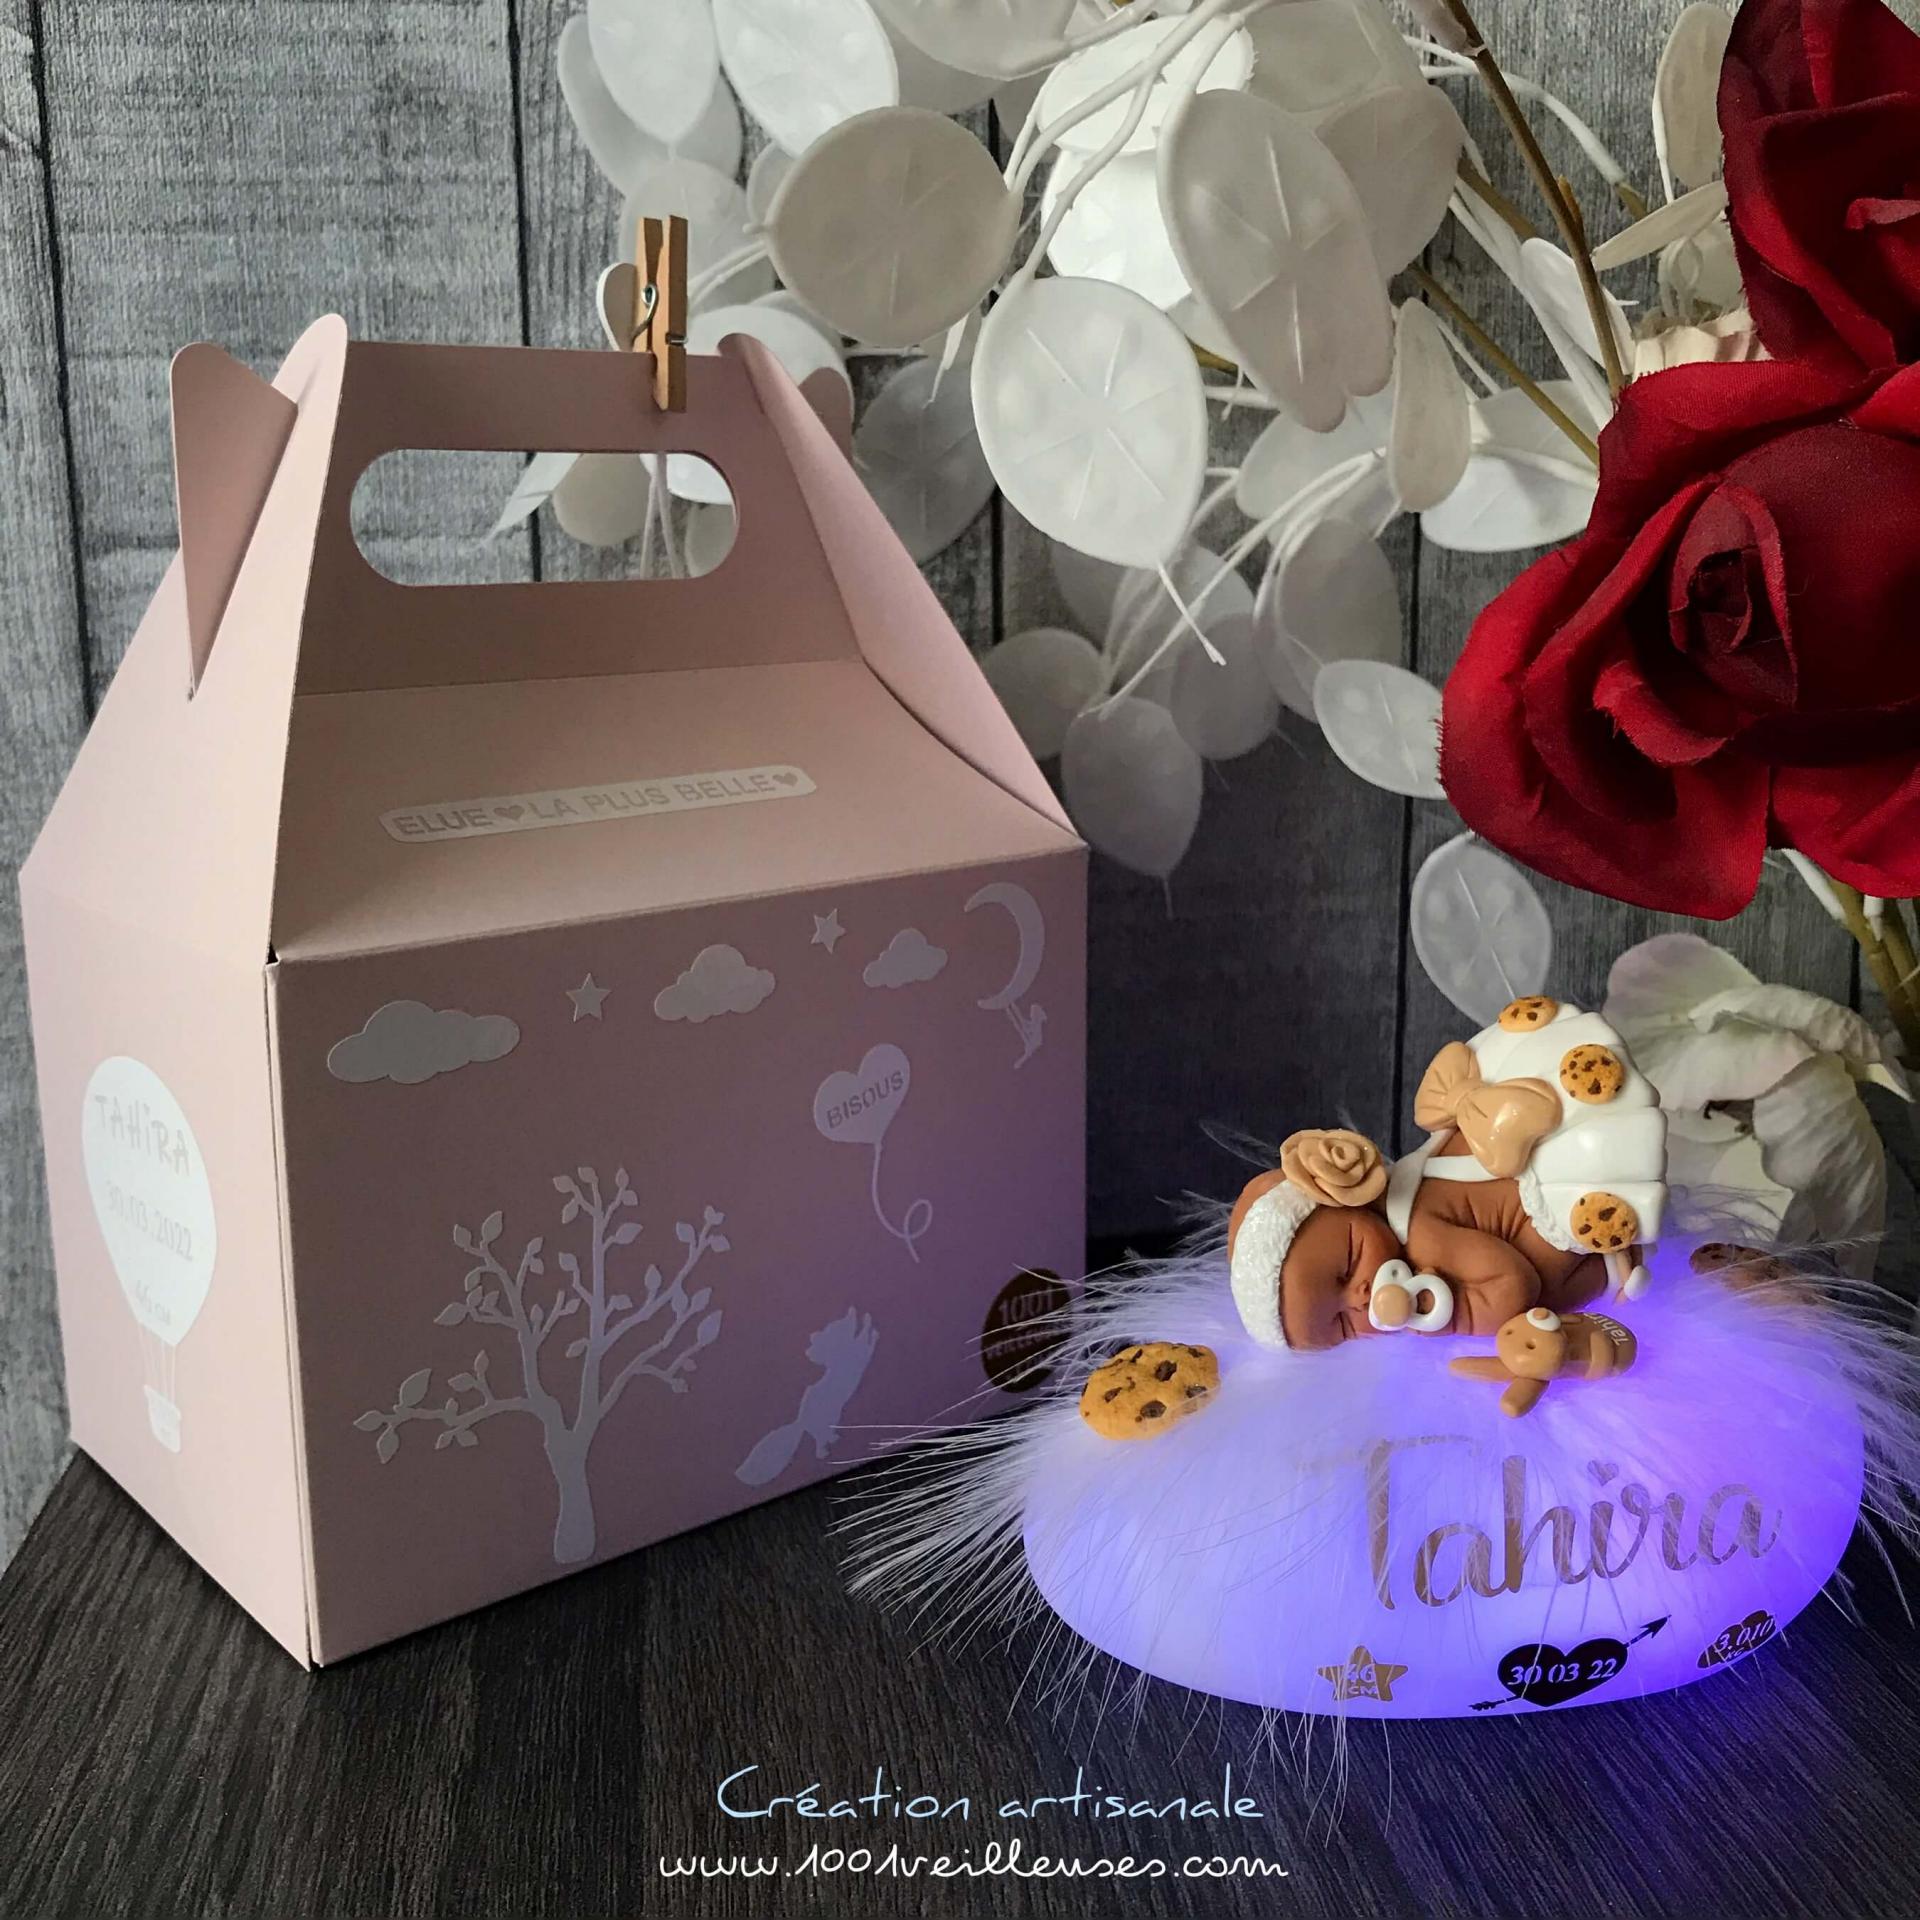 Lovely night light for girls shaped like a luminous pebble with their name, bunny plush, an ideal gift and keepsake for a baby with its birth box